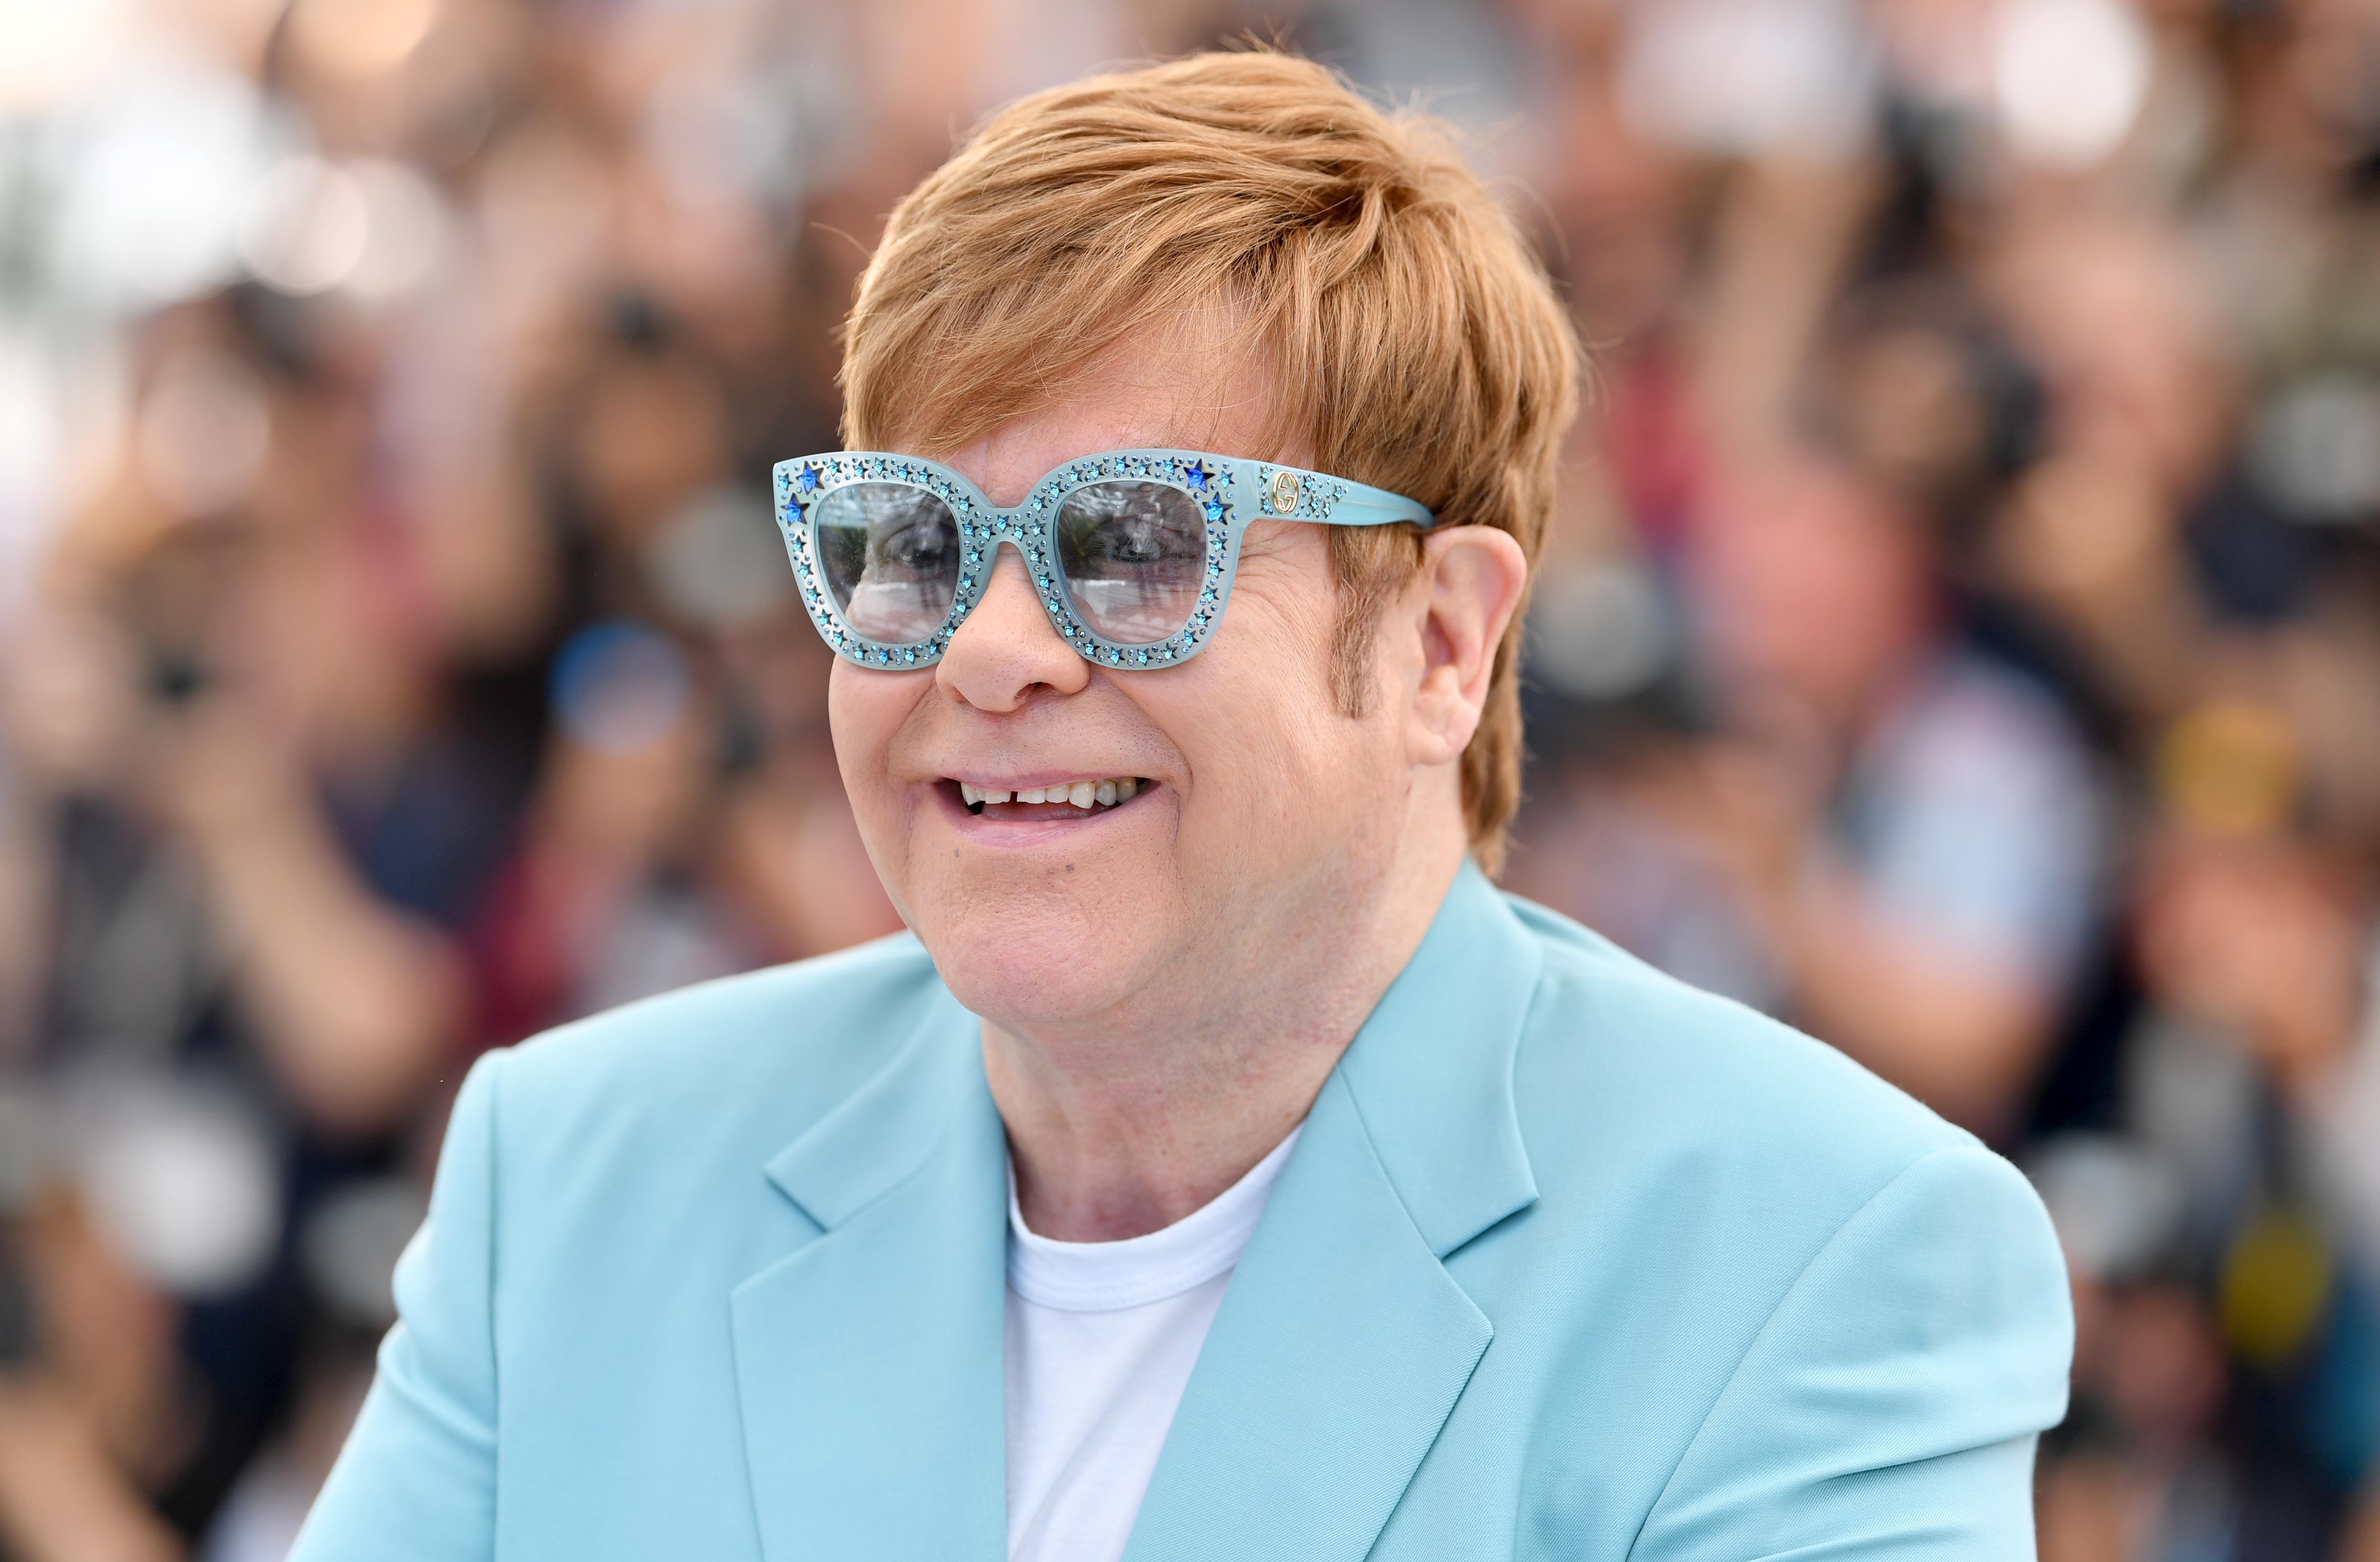  Elton John attends the photocall for "Rocketman" during the 72nd annual Cannes Film Festival on May 16, 2019, in Cannes, France. | Source: Getty Images.